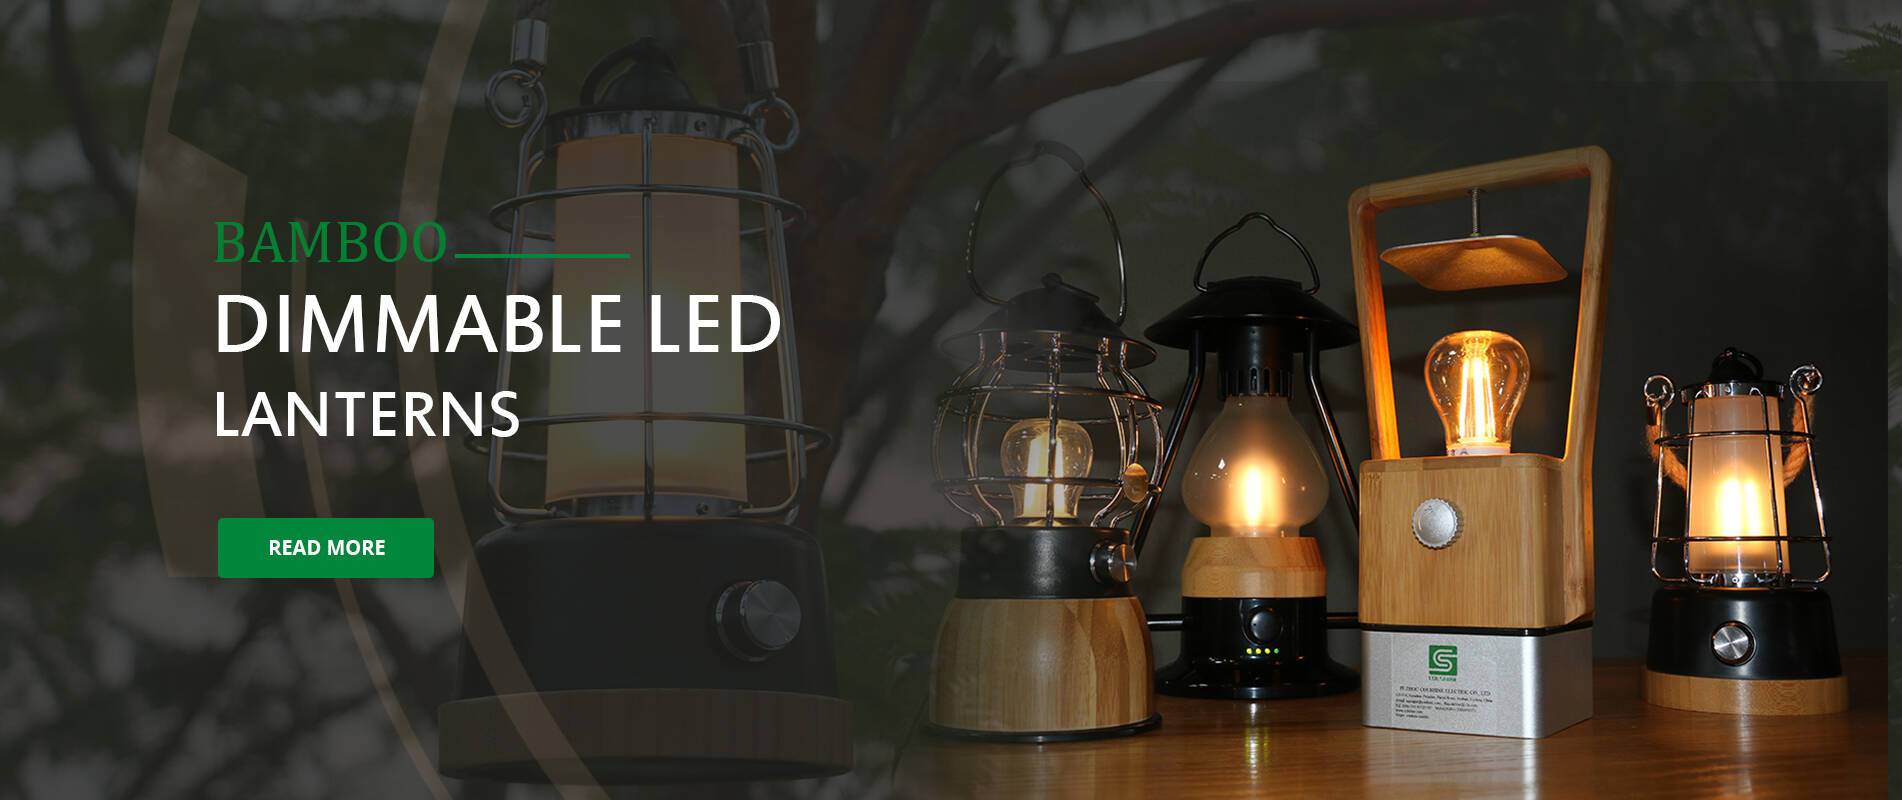 Dimmable Led Lanterns